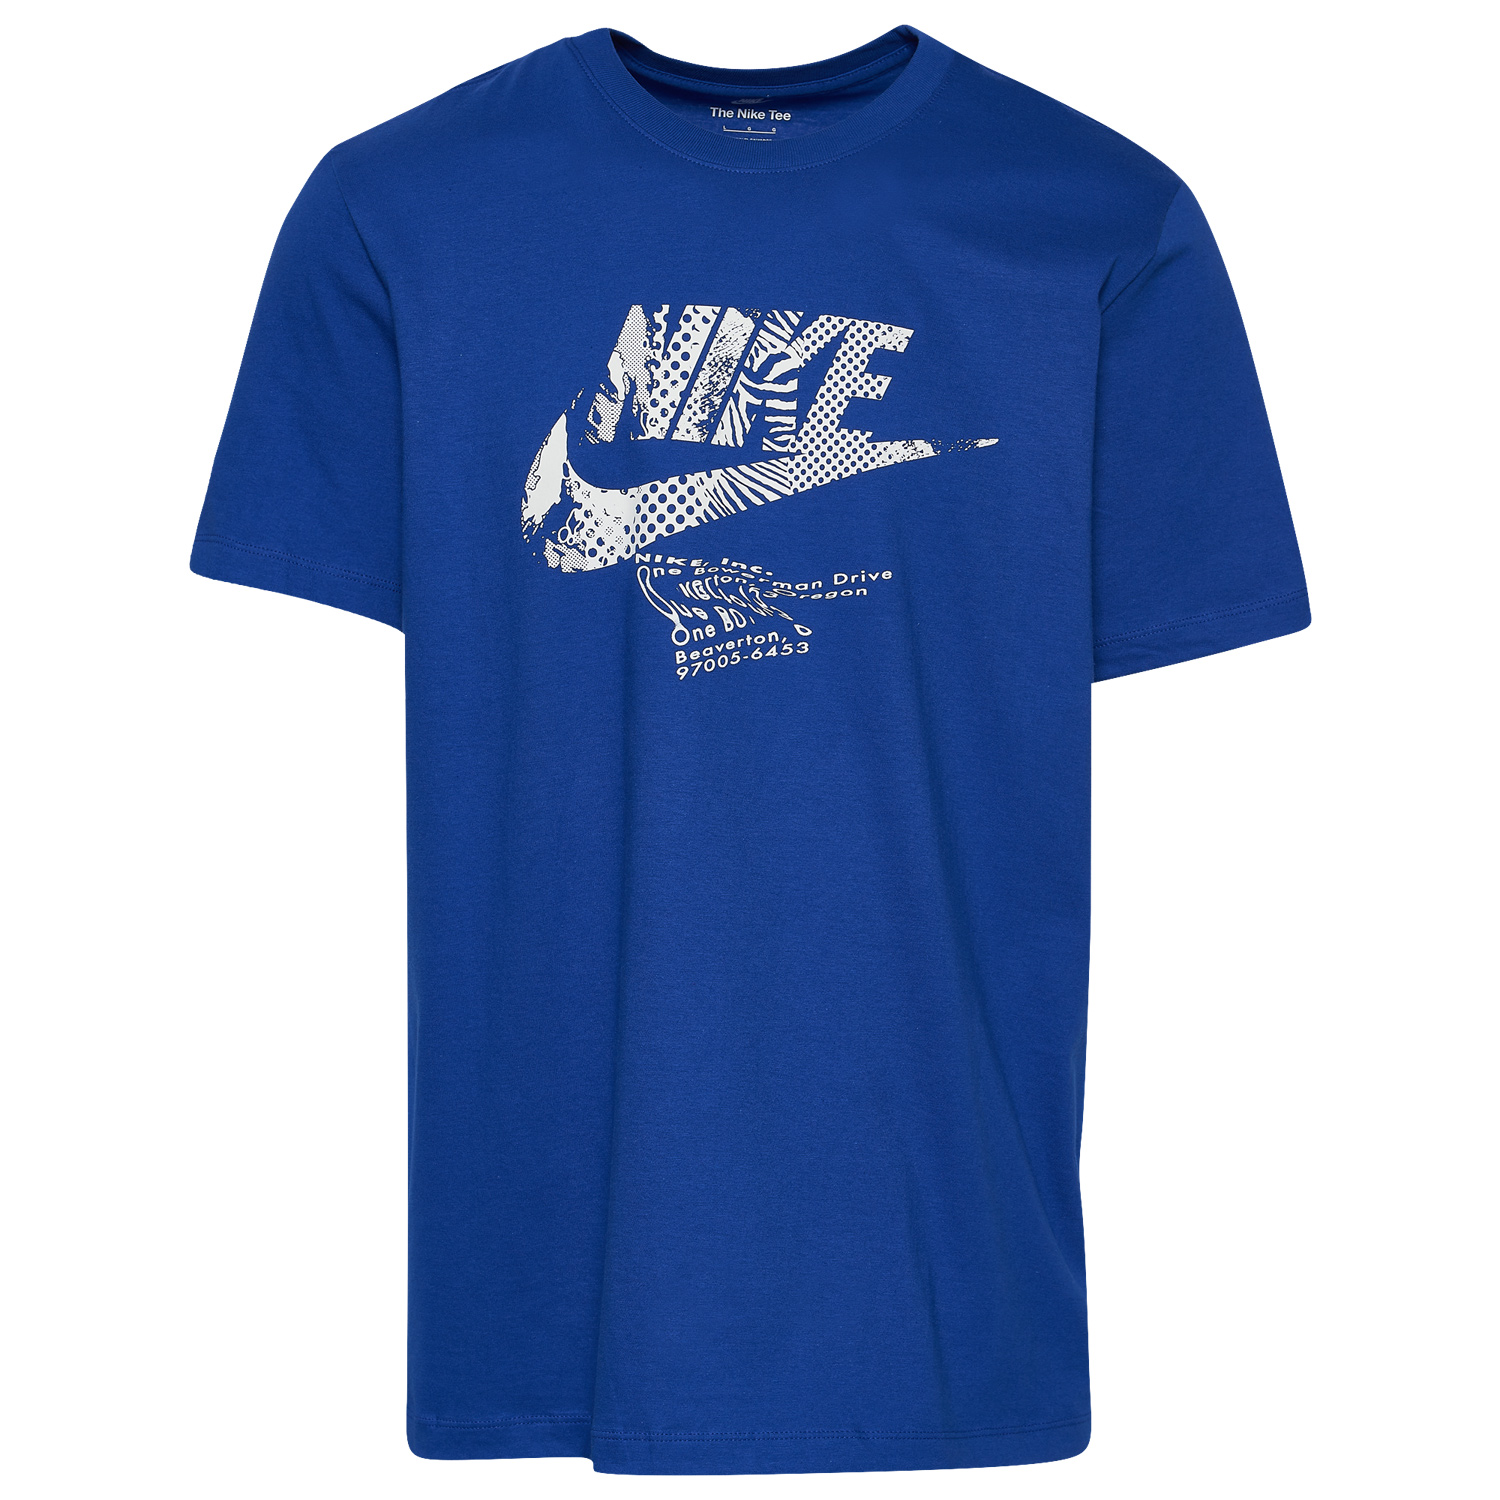 nike-alter-and-reveal-t-shirt-blue-white